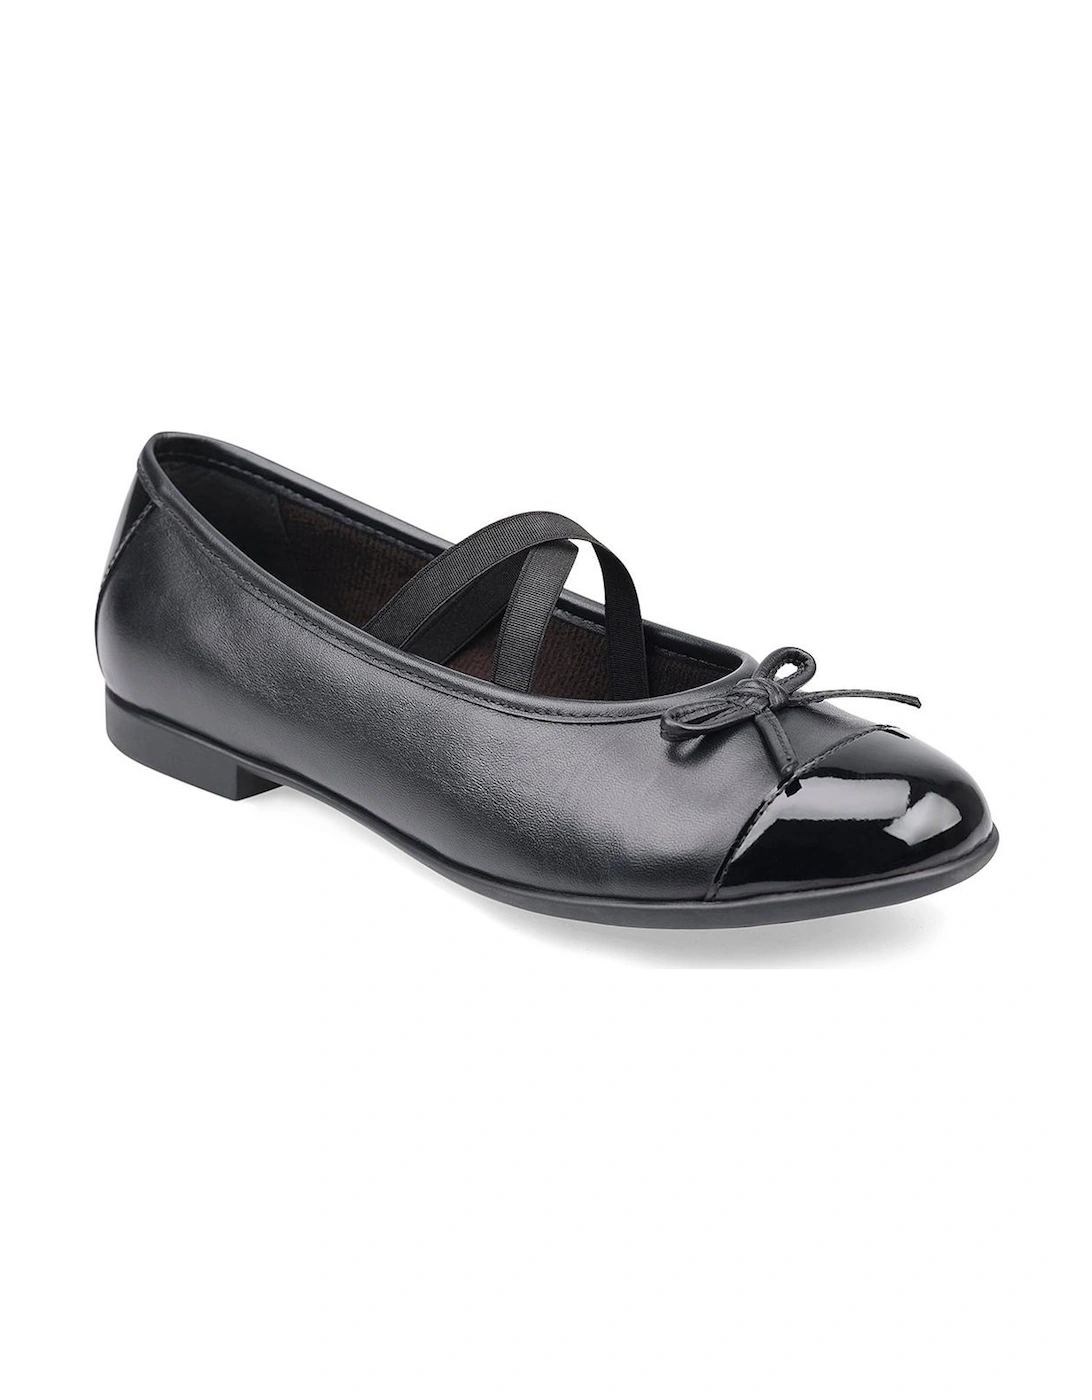 Girls Idol Patent Leather Slip On School Shoes with Bow - Black